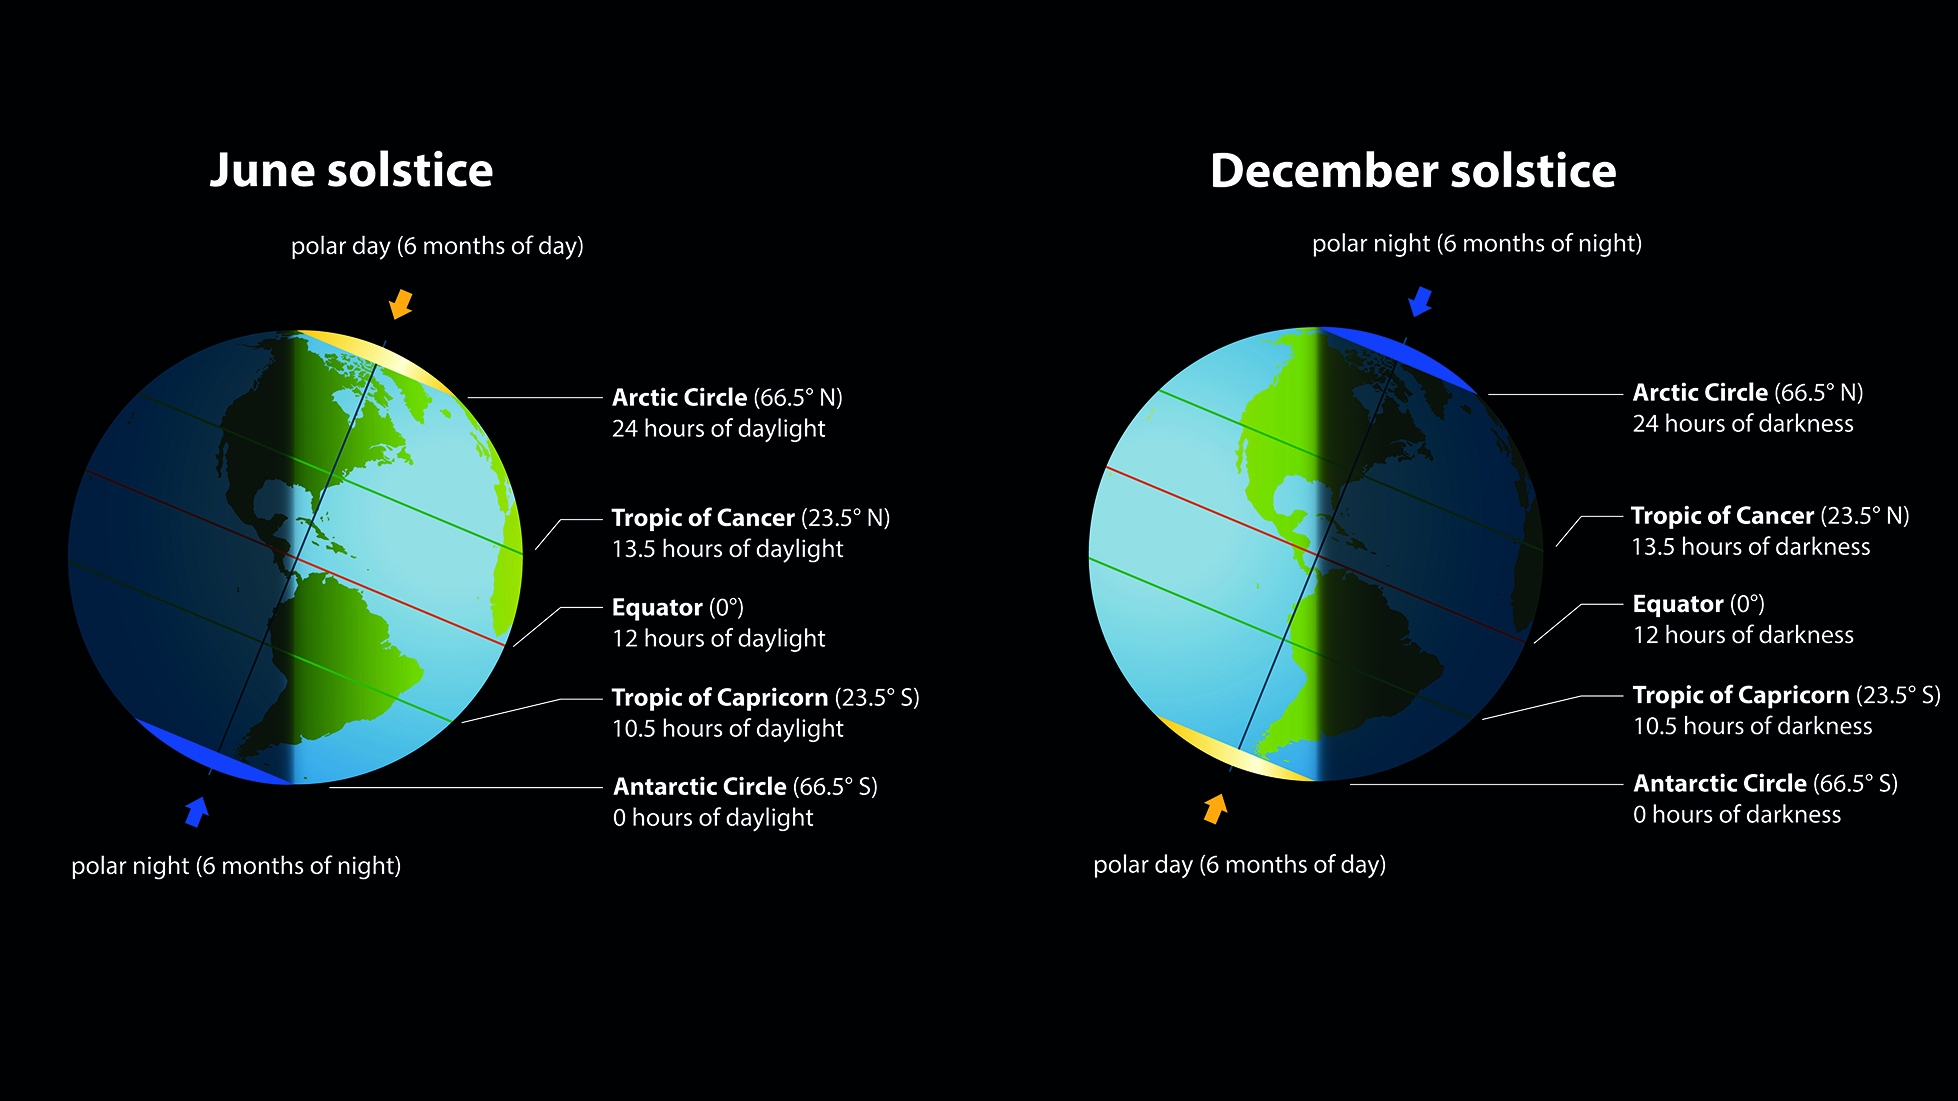 Infographic showing planet Earth during the June solstice and the December solstice, with hours of daylight and darkness for comparison.